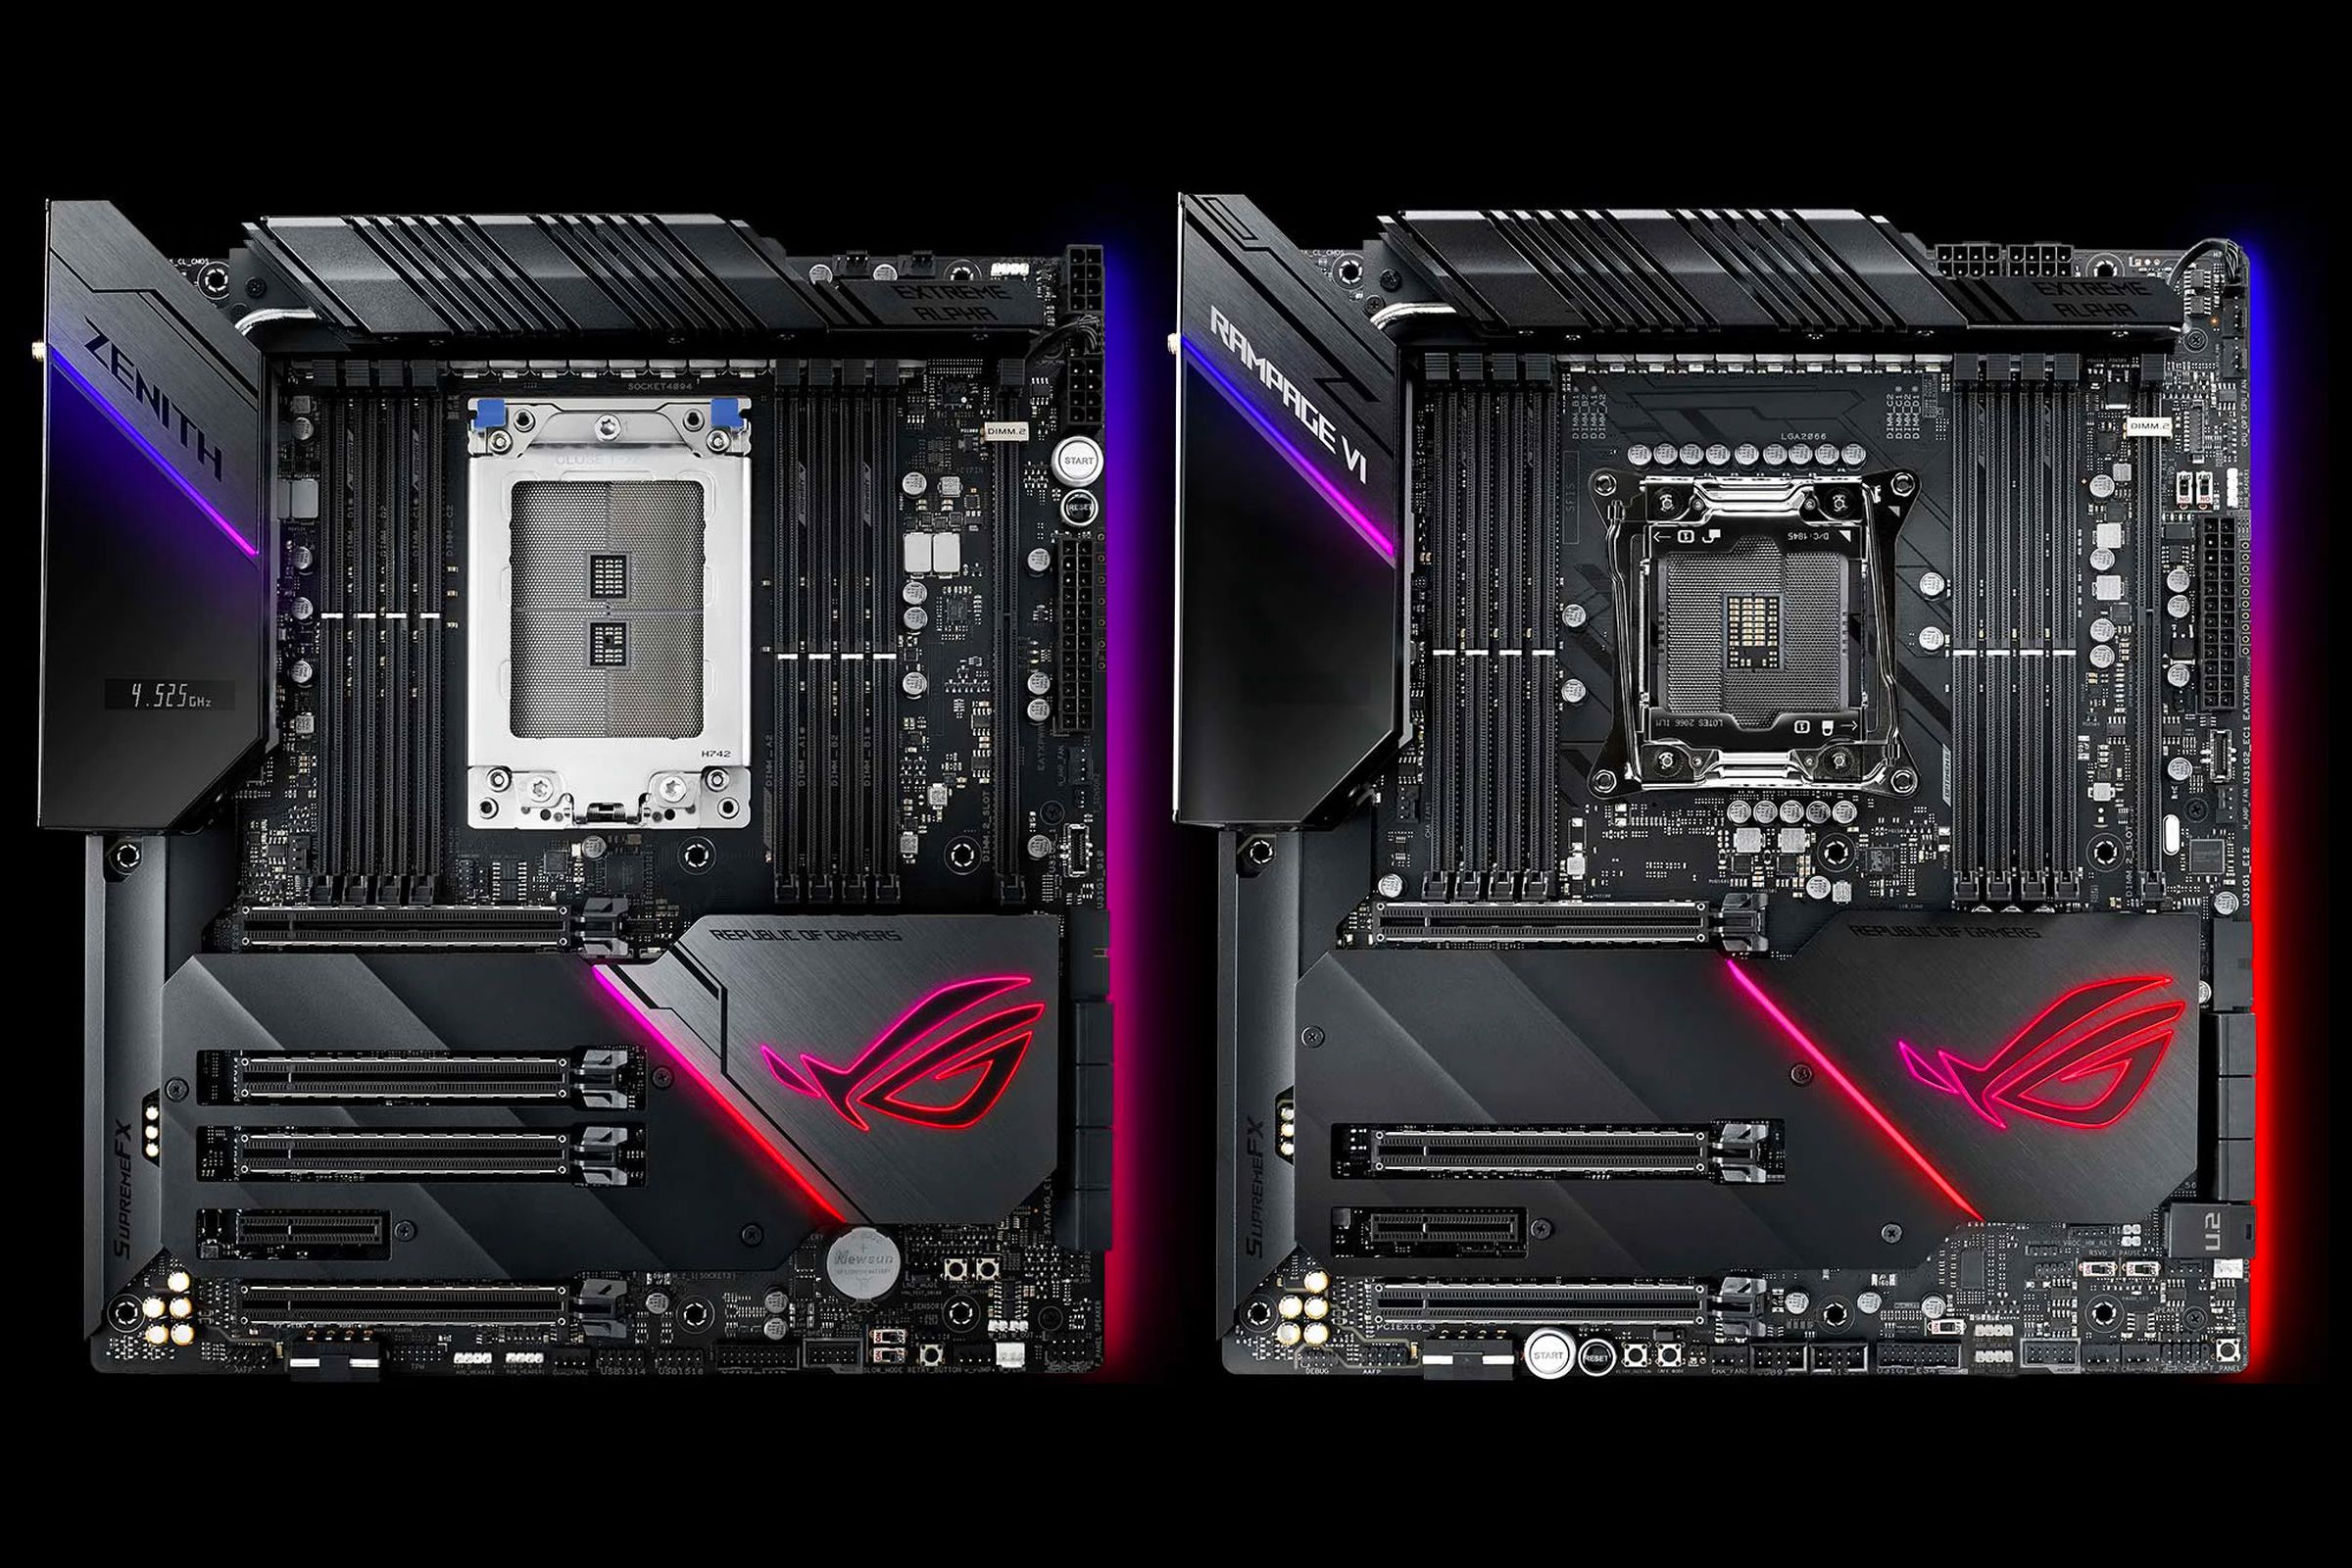 Asus ROG Zenith Extreme Alpha for AMD processors (left) and Asus ROG Rampage VI Extreme Omega for Intel systems.